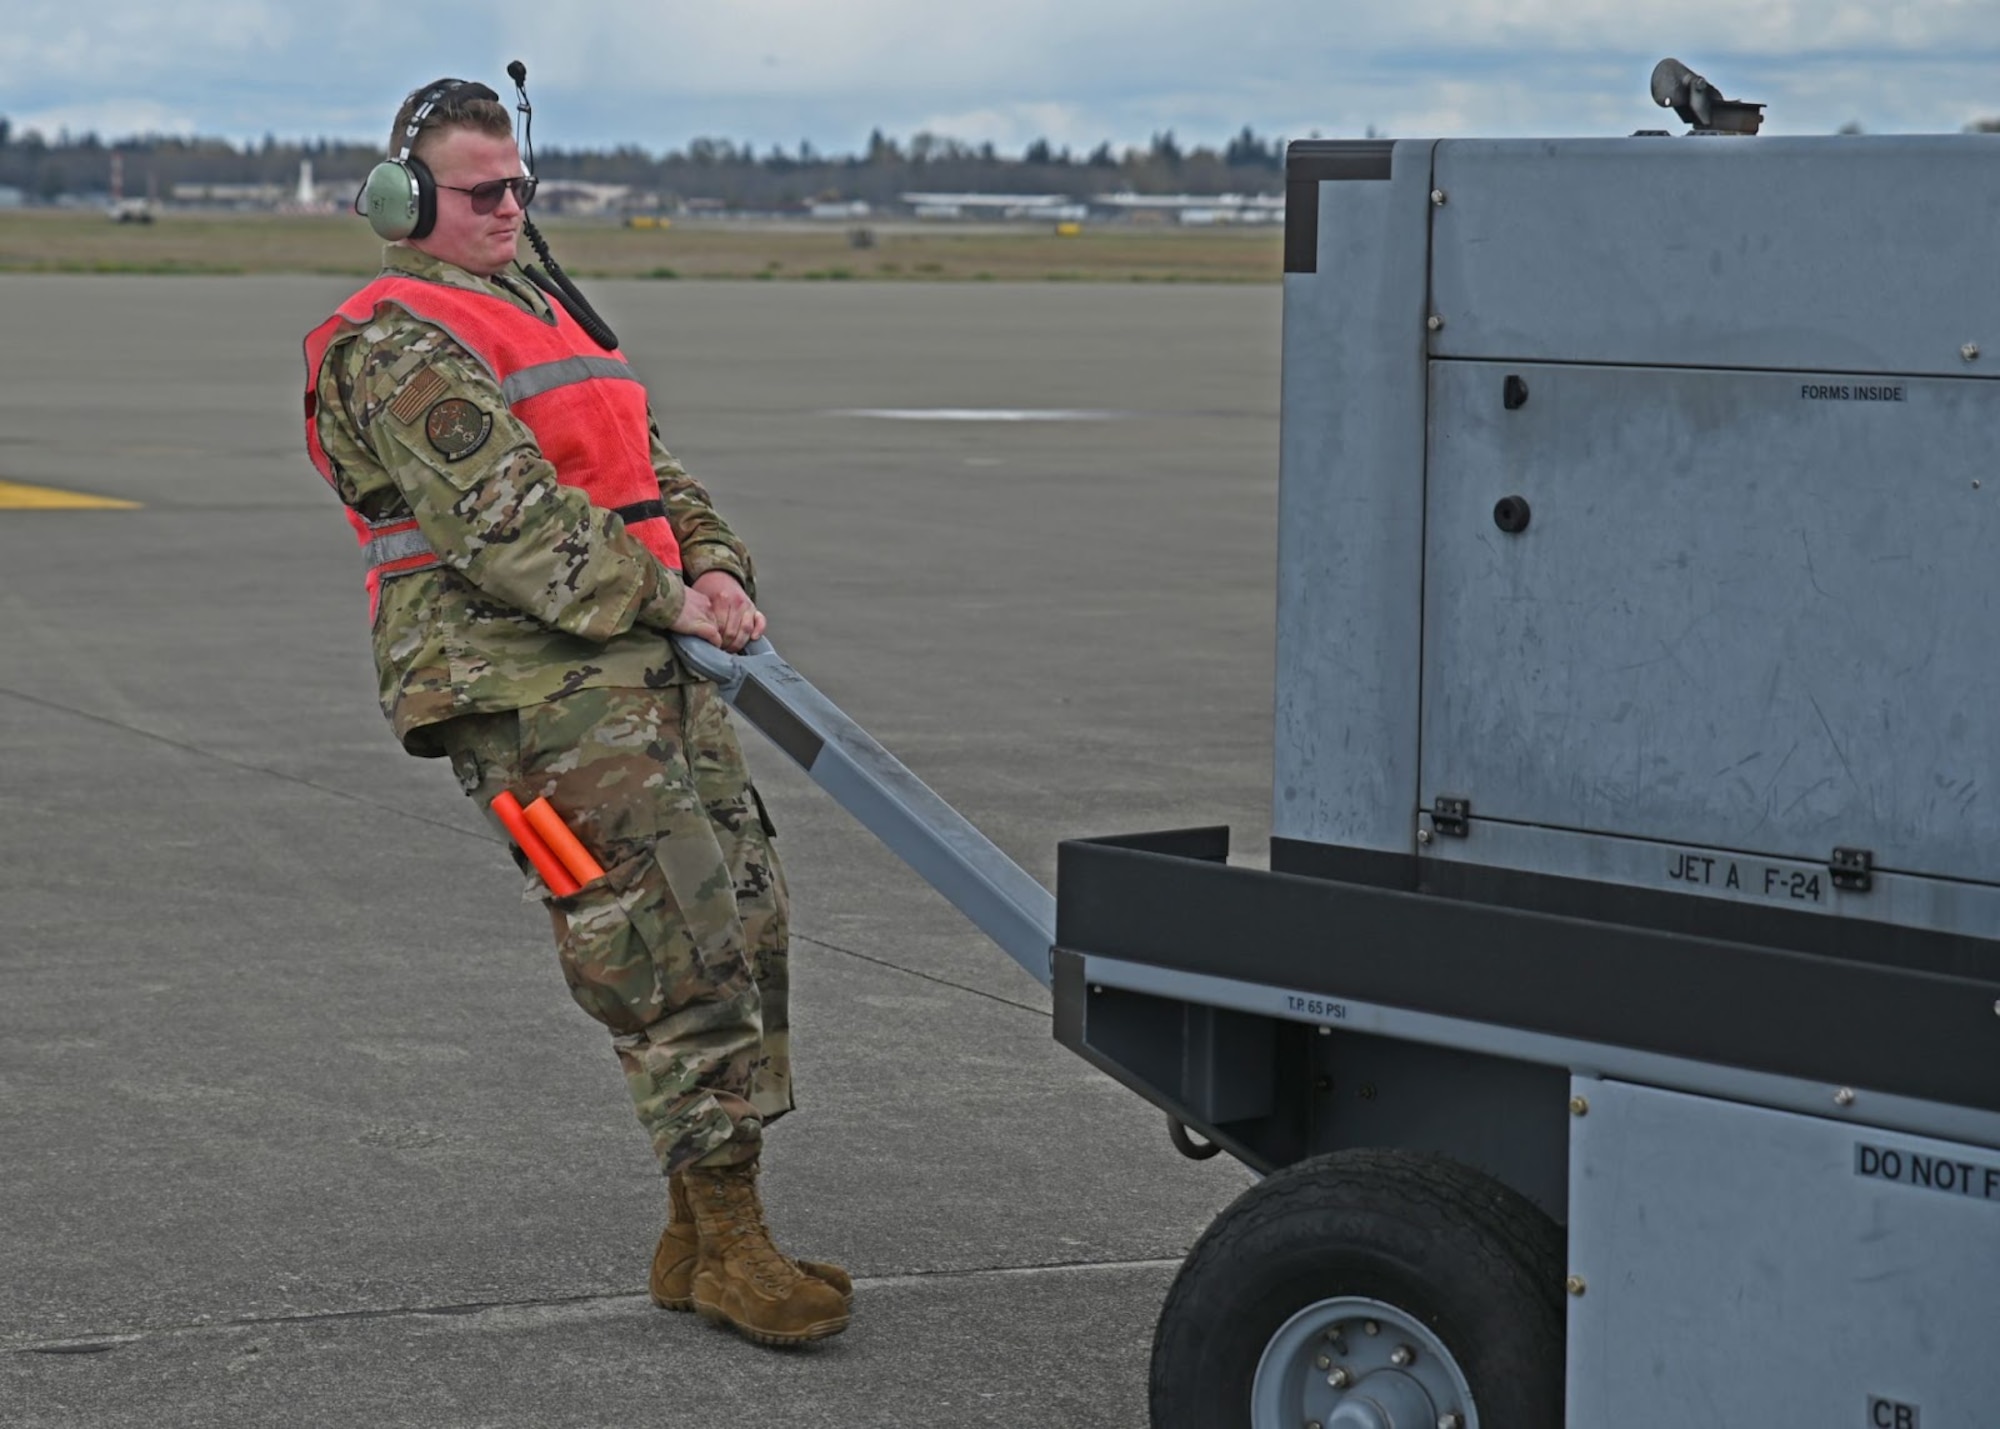 U.S. Air Force Staff Sgt. Oden Bagley, aircraft hydraulics specialist with the 62nd Maintenance Squadron, moves a power cart on the flightline during Agile Combat Employment Training at Joint Base Lewis-McChord, Washington, April 21, 2022. The week-long ACE training encourages Airmen to learn and perform outside their designated specialty to streamline maintenance operations. (U.S. Air Force photo by Airman 1st Class Callie Norton)